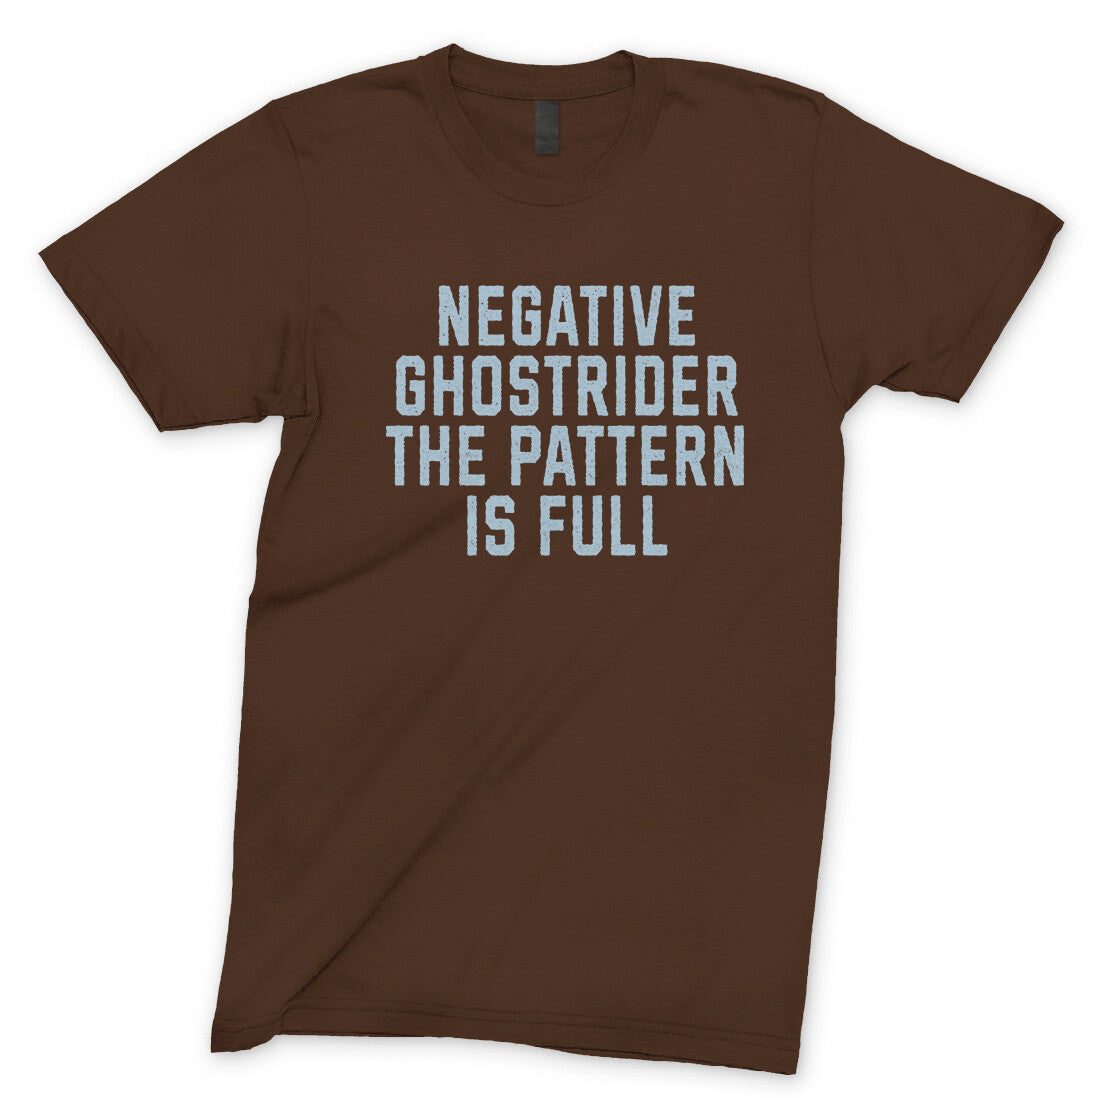 Negative Ghostrider the Pattern is Full in Dark Chocolate Color